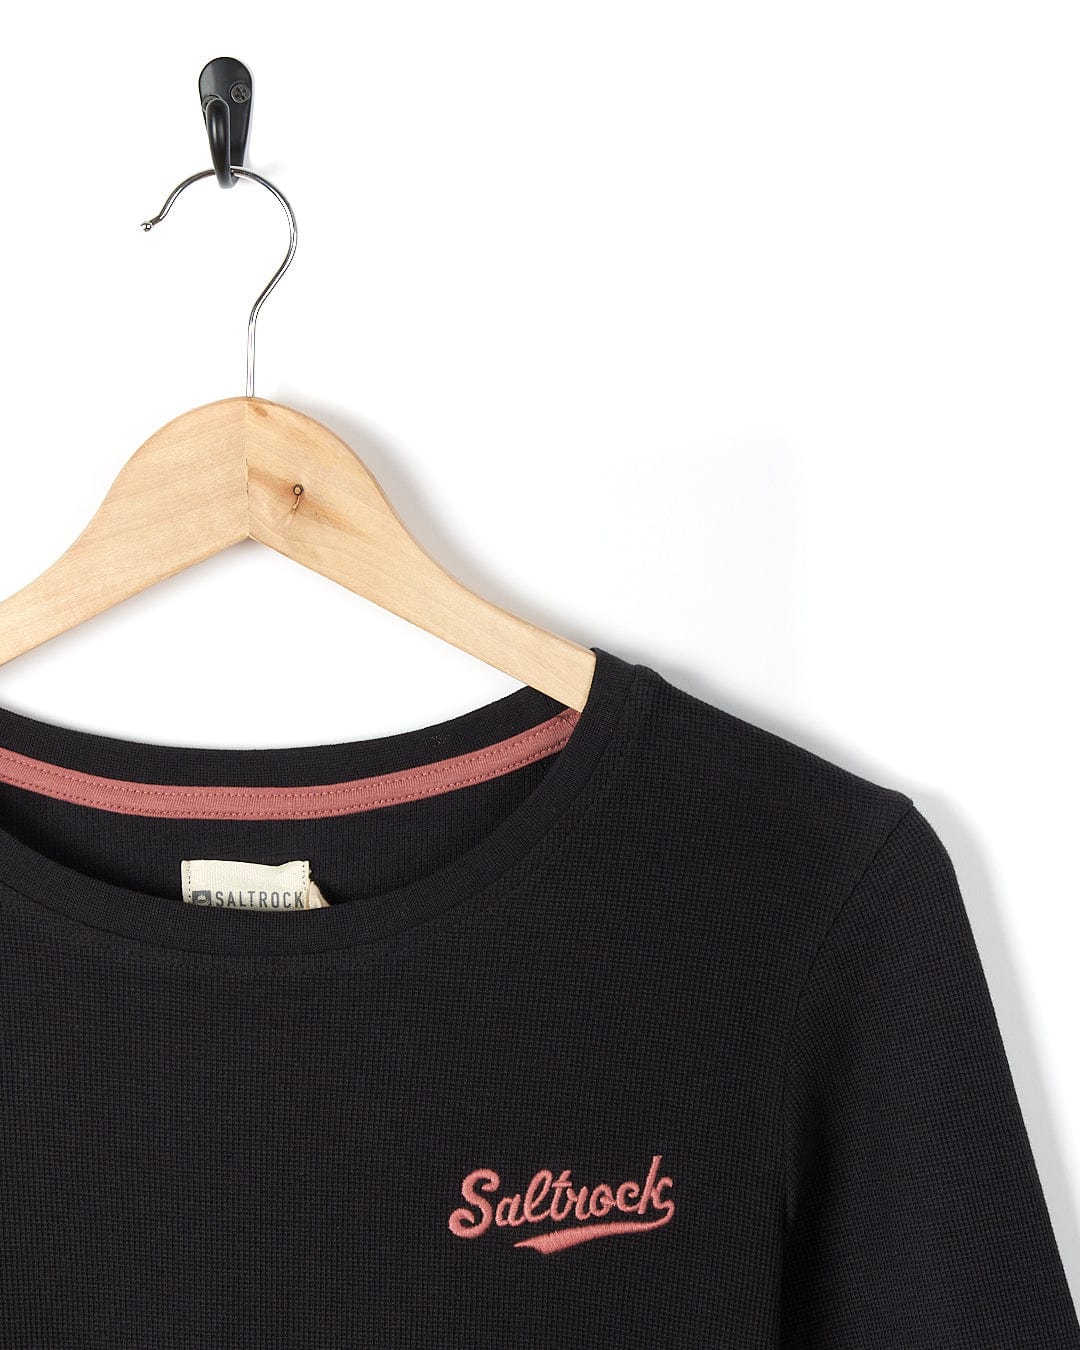 A Saltrock Rory - Womens Long Sleeve Waffle T-Shirt - Black with a pink logo on it.